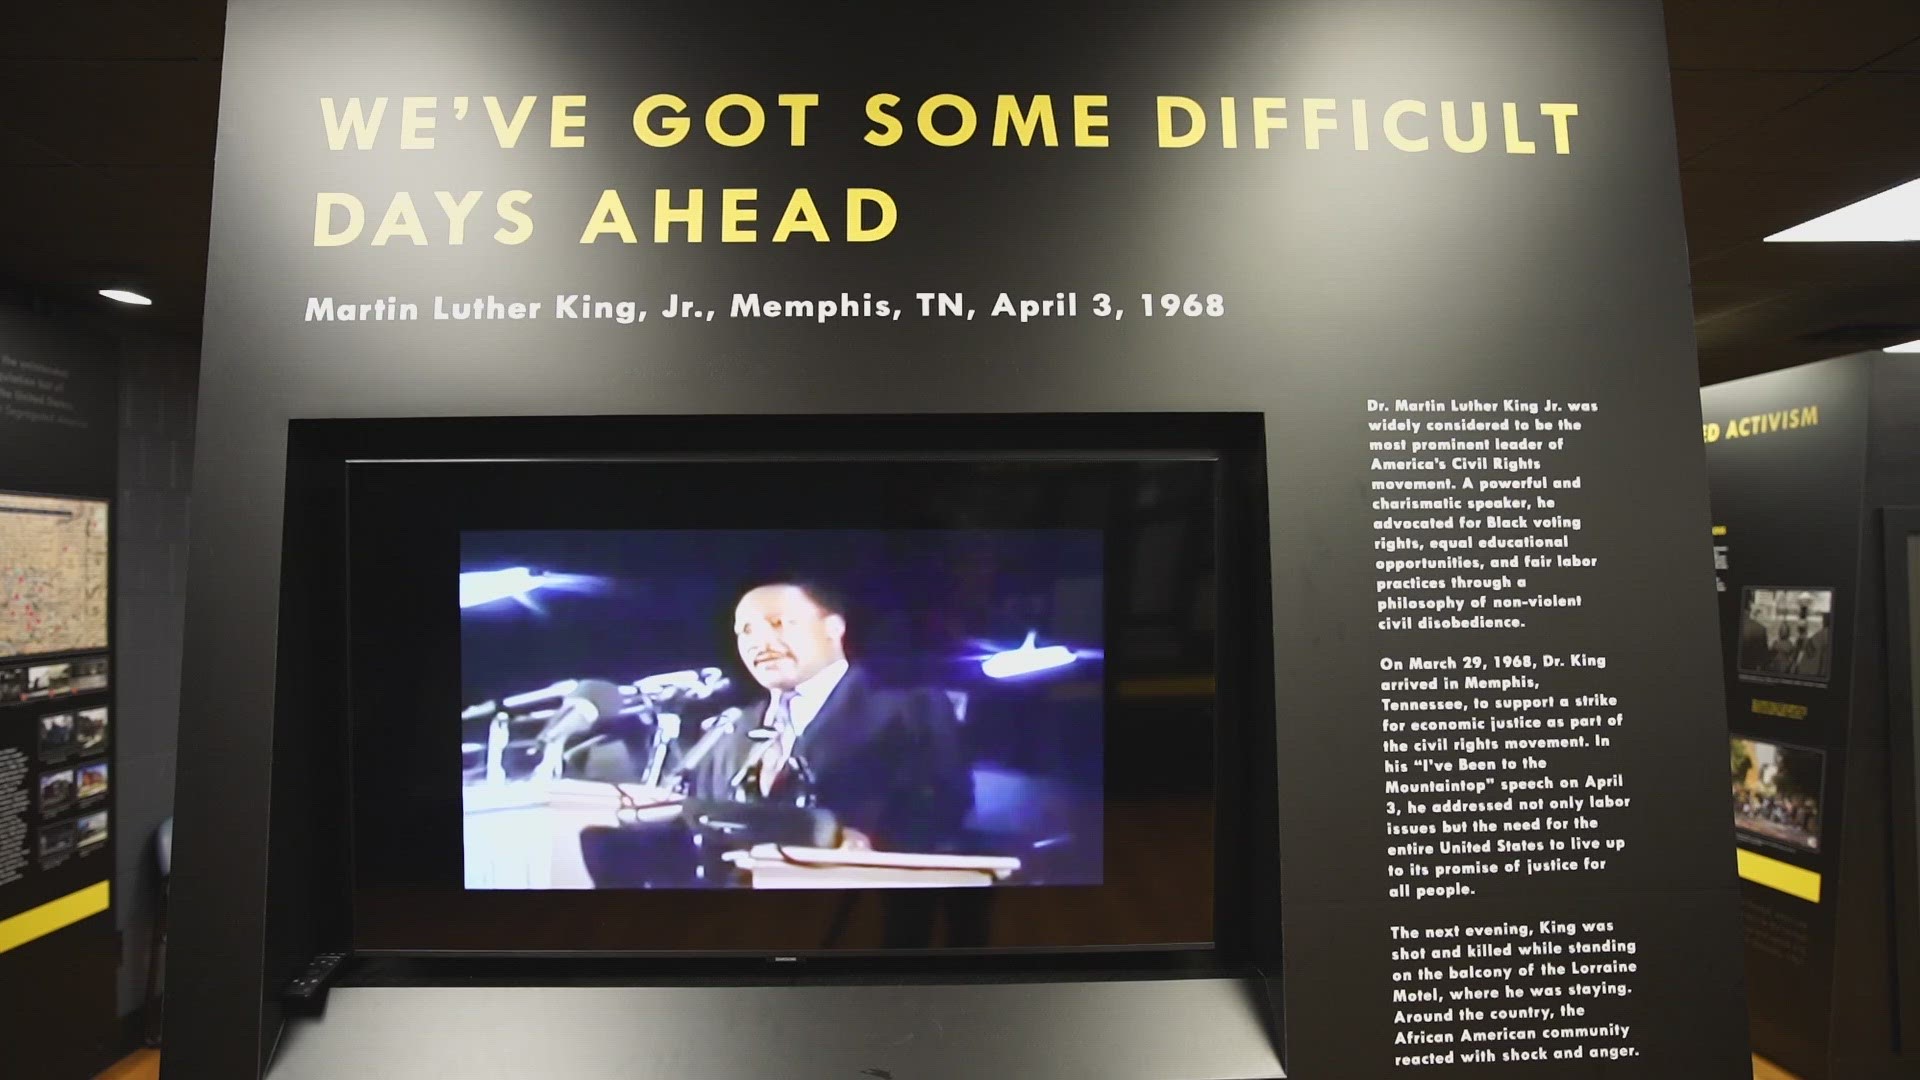 It's an interactive exhibit that lets you learn about the life of Doctor King as well as how Robert F Kennedy delivered the news of Dr. King's assassination.